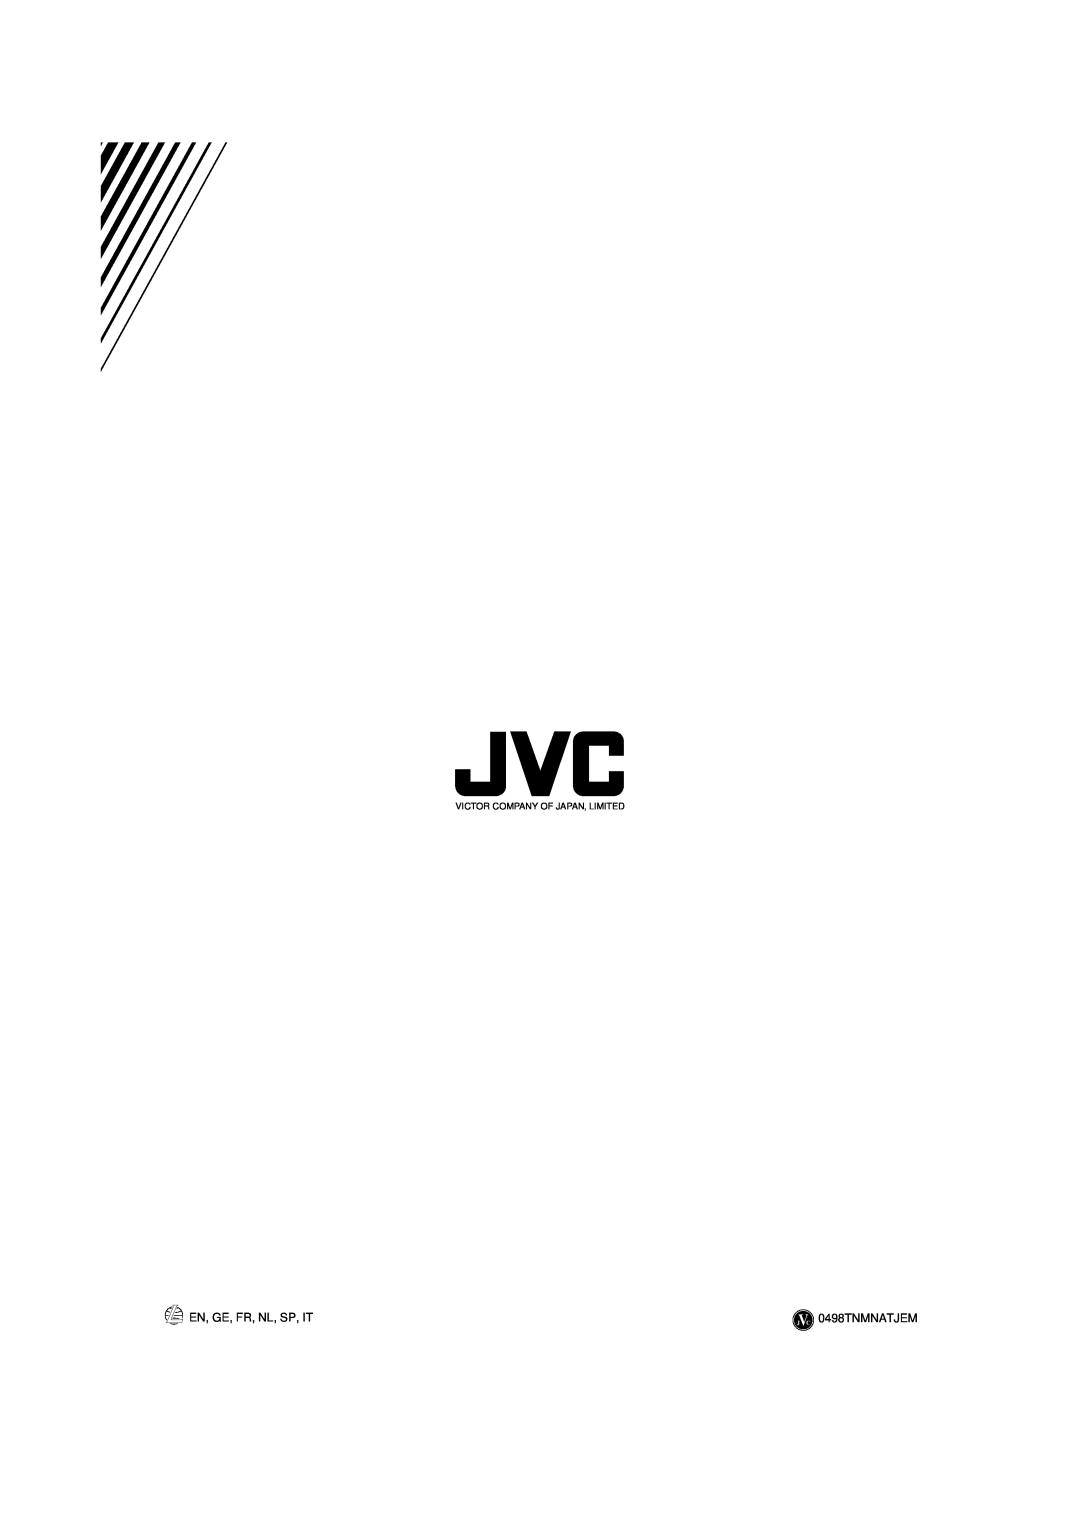 JVC CA-D452TR, CA-D432TR manual En, Ge, Fr, Nl, Sp, It, 0498TNMNATJEM, Victor Company Of Japan, Limited 